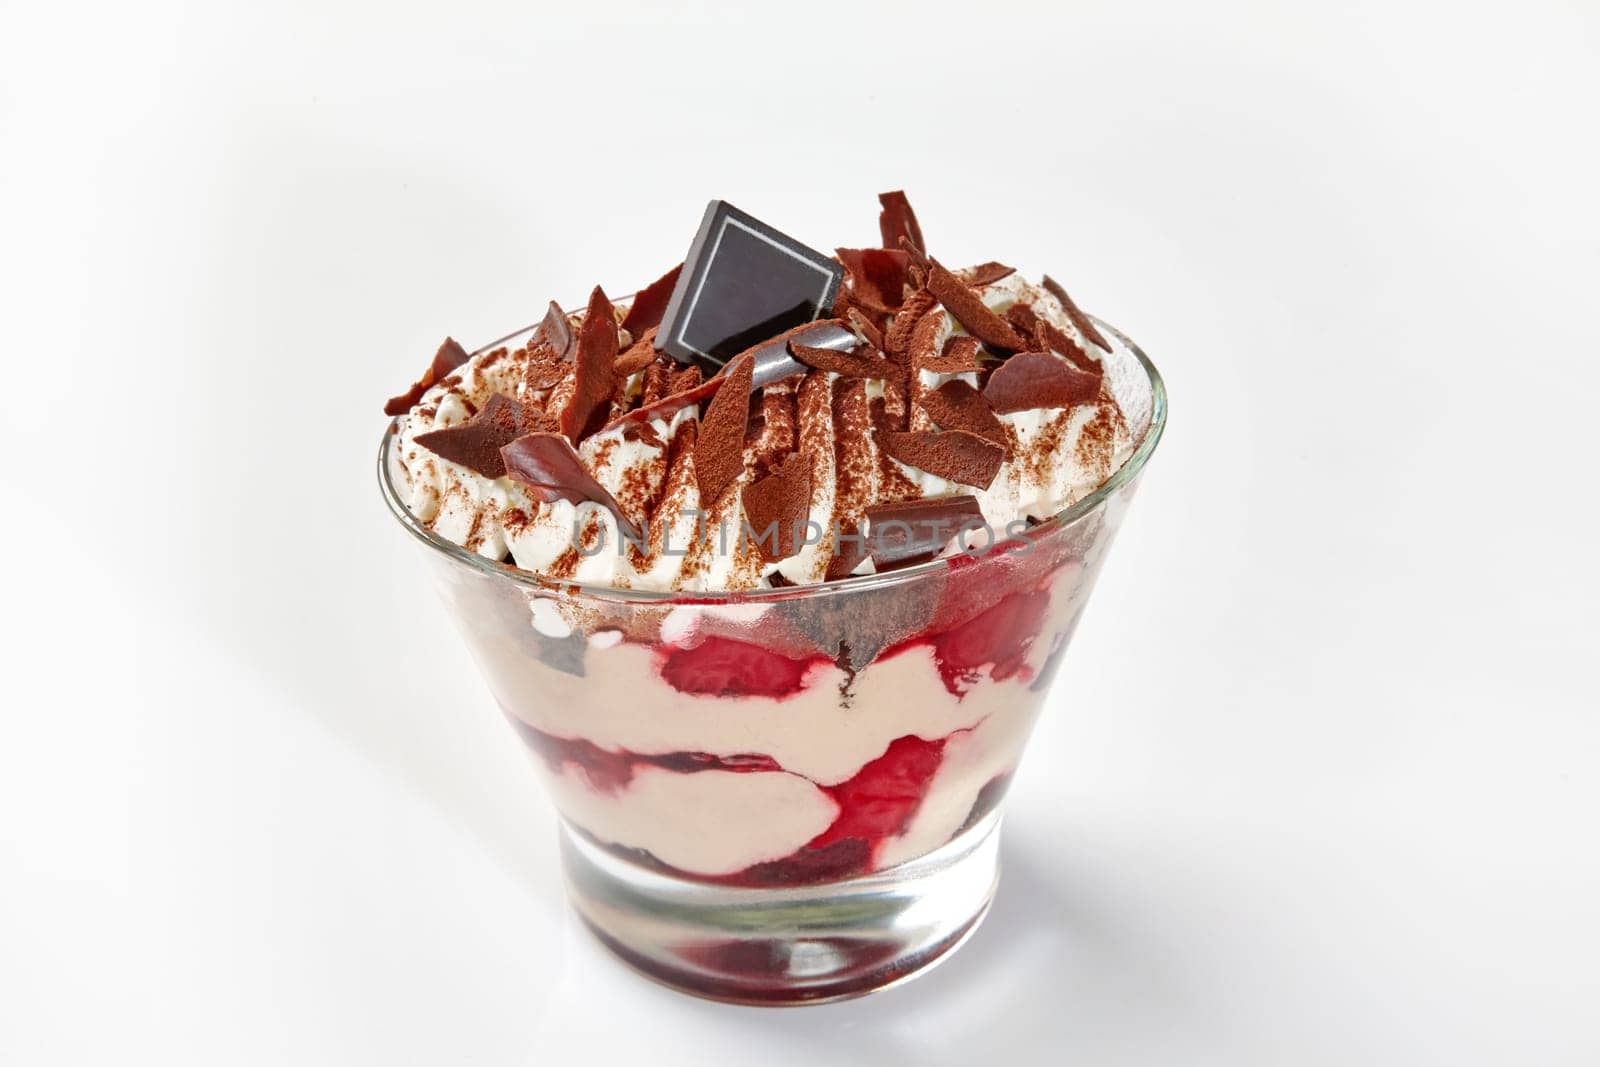 Luxurious chocolate and berry sundae with whipped cream, fresh cherries and chocolate shavings dusted with cocoa in clear dessert glass on white background